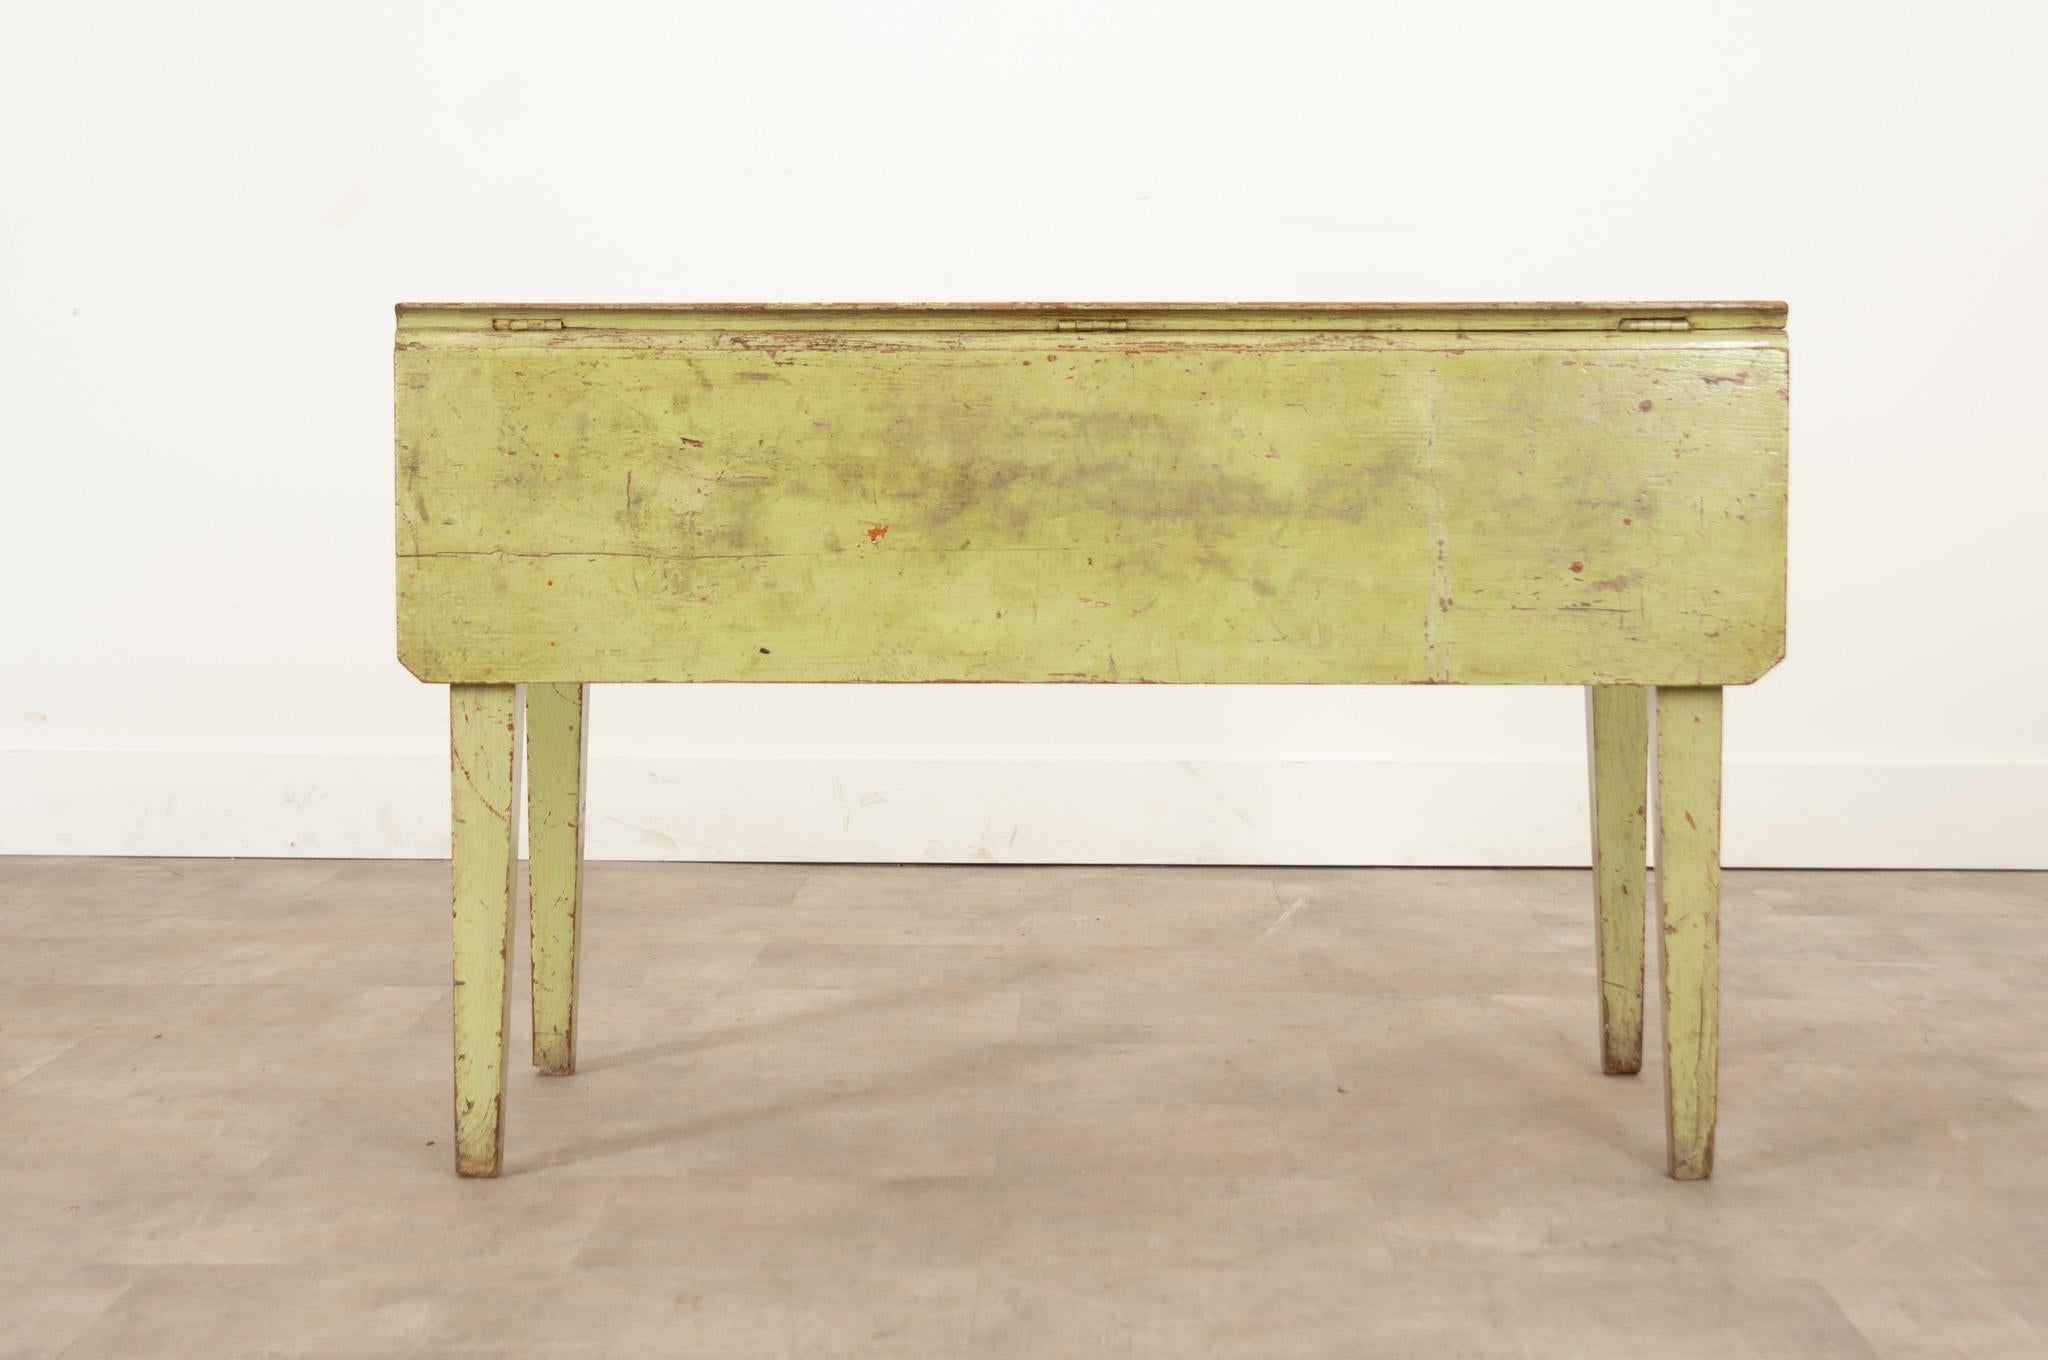 This gardeners work table from 19th century England is a fantastic way to add a rustic pop of color to your space. The worn lime colored paint bears the marks of much use over the last two decades, giving it tons of antique charm. The front drop